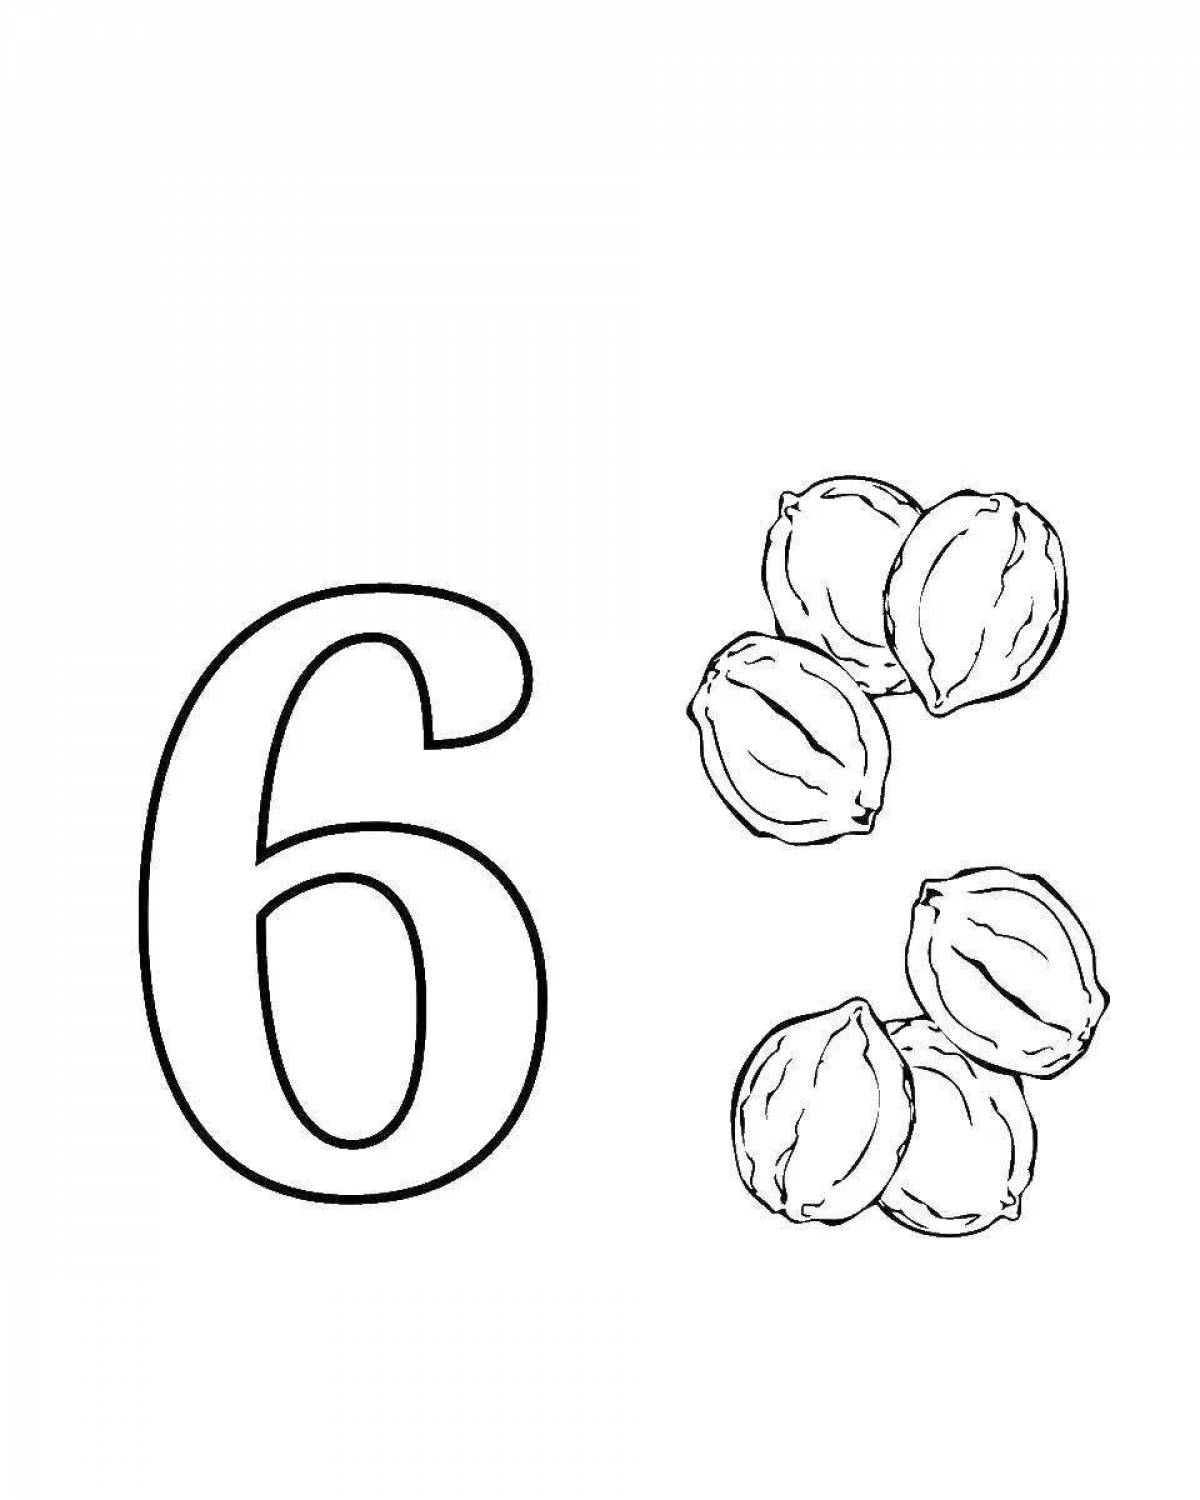 Delightful coloring page 6